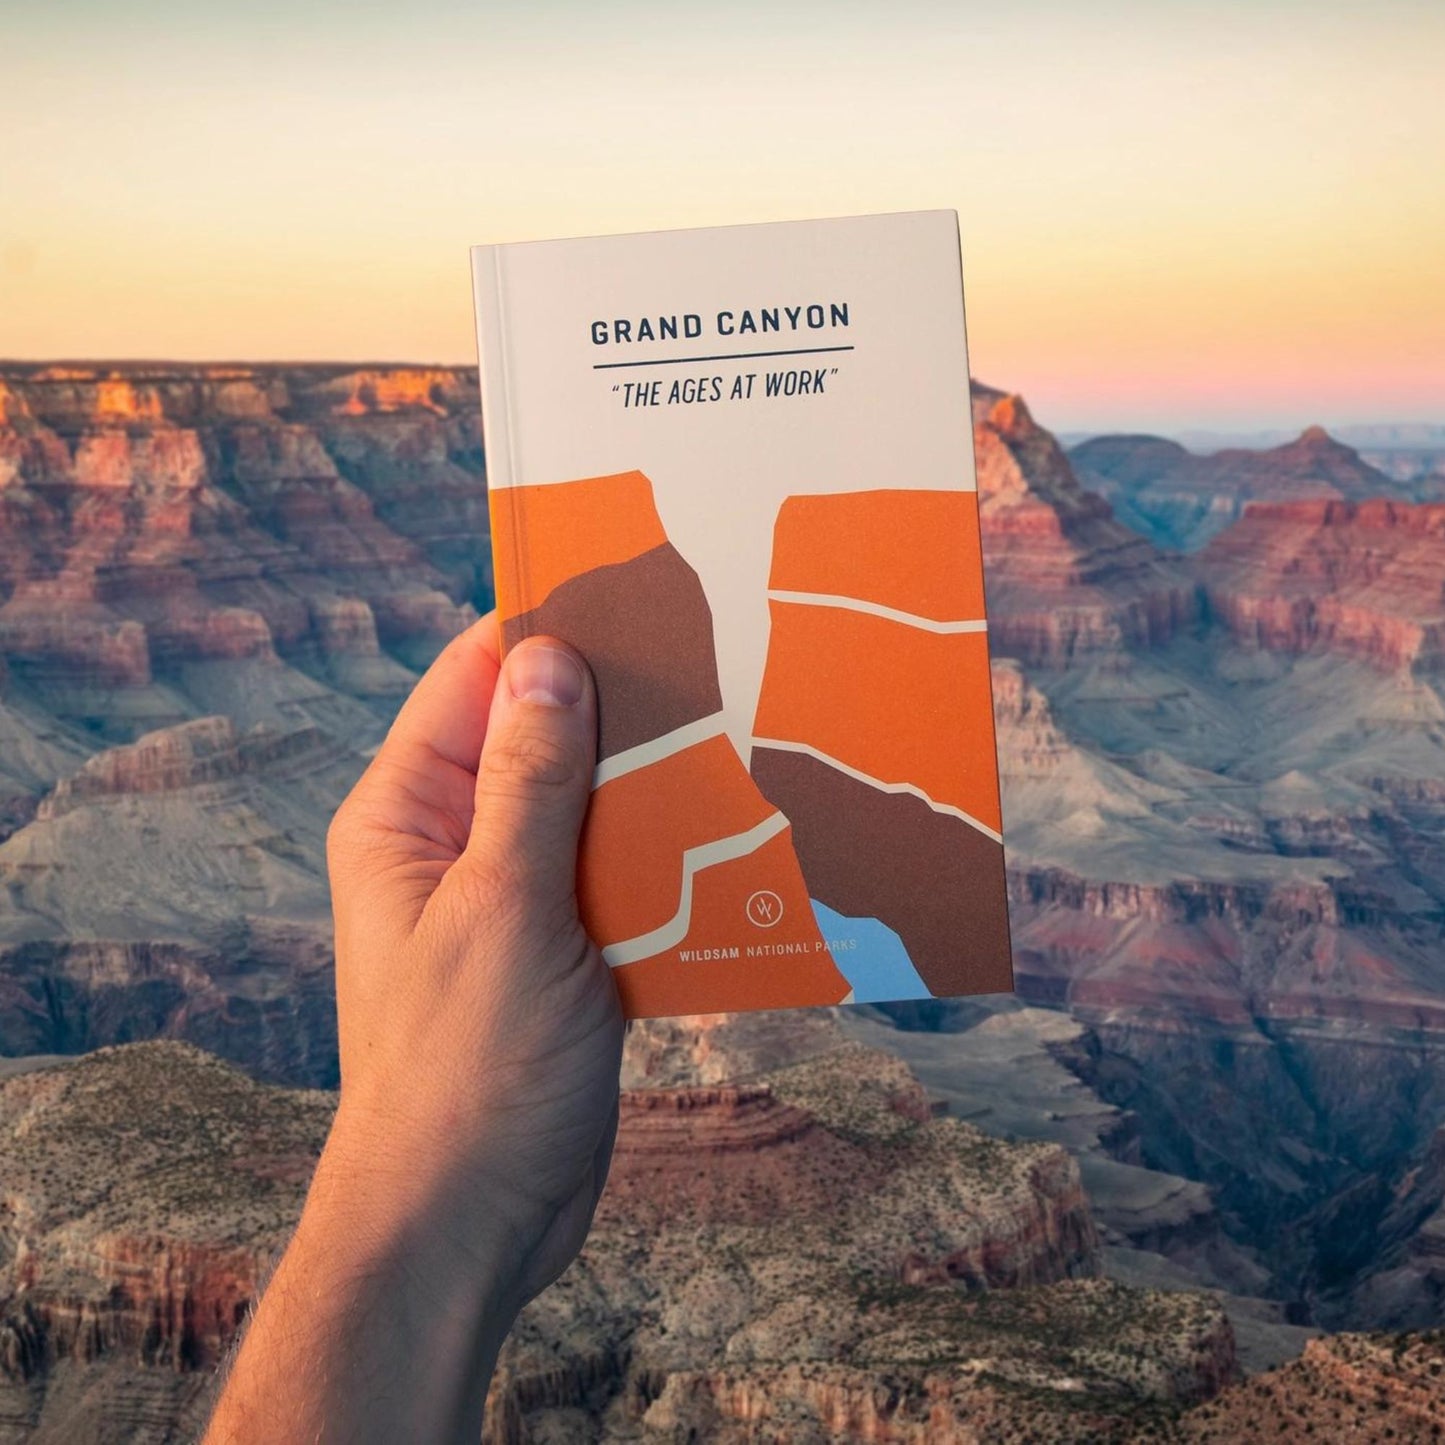 Wildsam Field Guides Grand Canyon National Park Guide